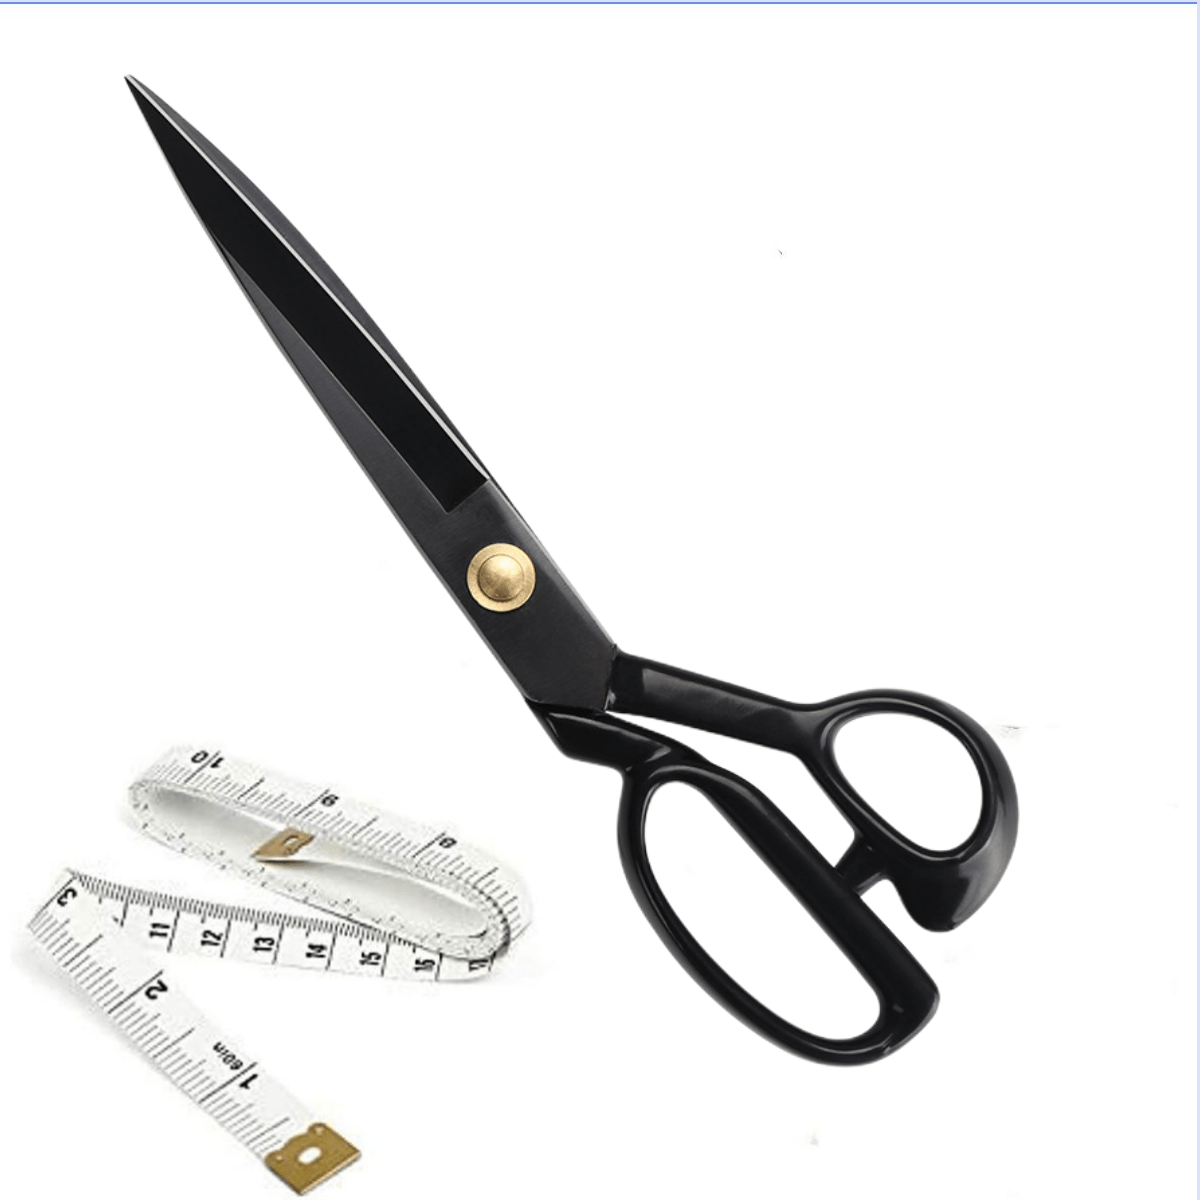 JRF Leather Scissors Large Scissors Cutting Leather Vegetable Tanned  Leather Cutting Household Scissors Tailor Scissors - AliExpress